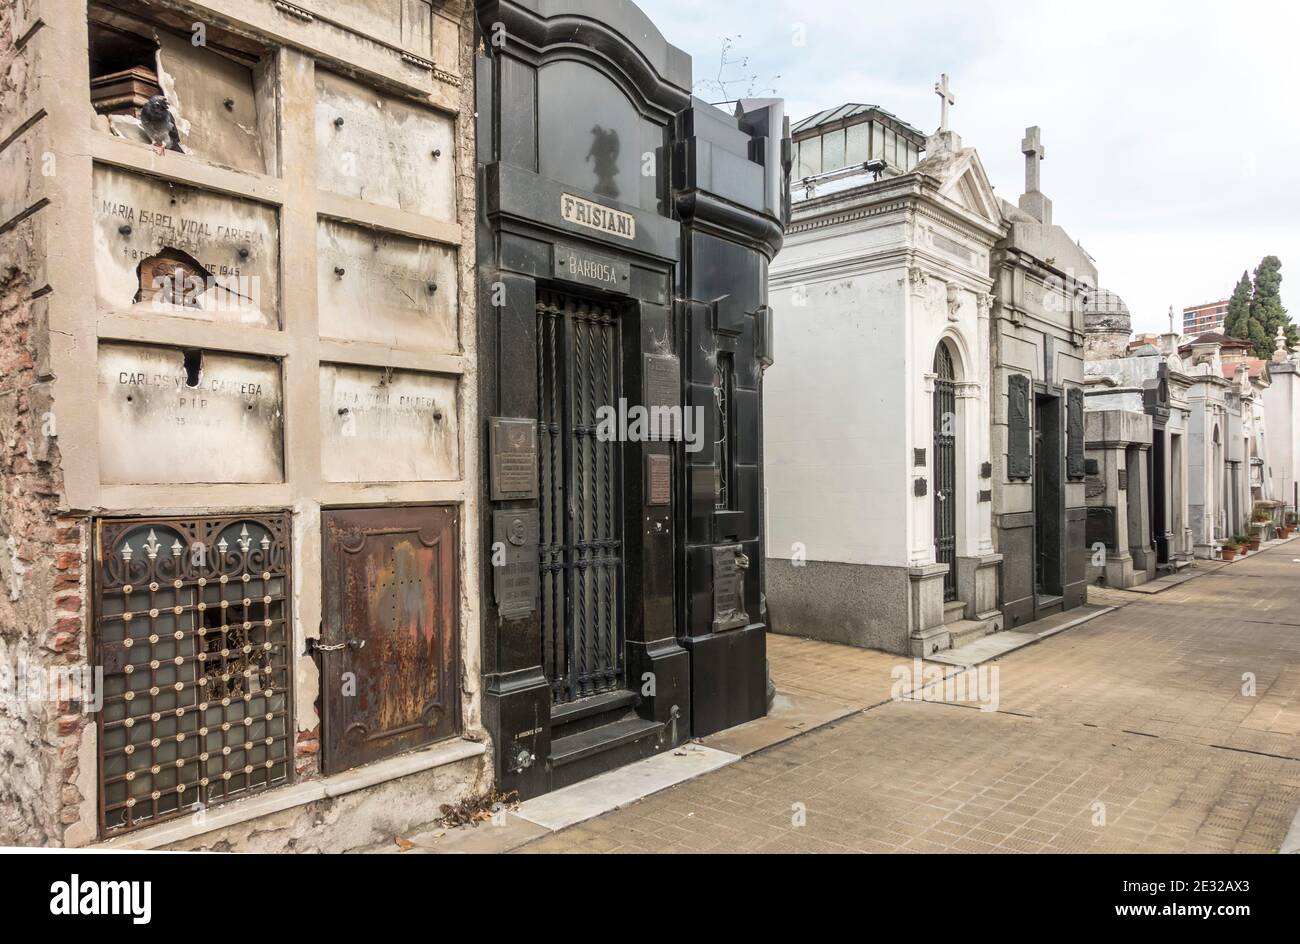 neglected above ground tombs in Recoleta cemetery, Buenos Aires, Argentina Stock Photo